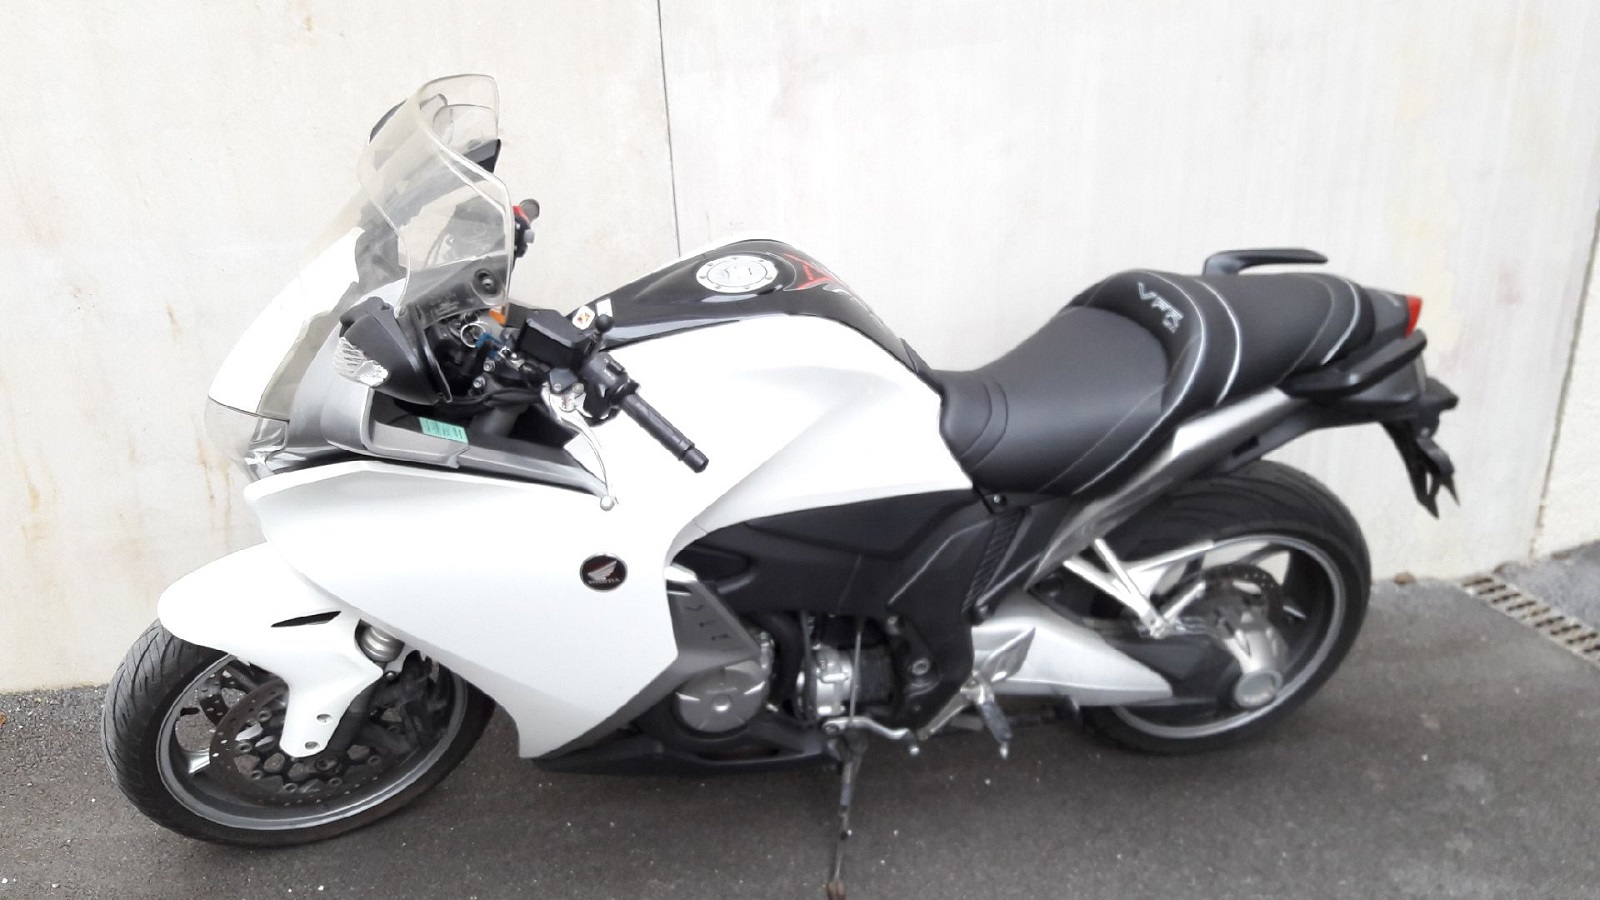 Honda Vfr 1200 F 2010 Deluxe Seats Petrol Tank Covers Tank Bags Rates For France